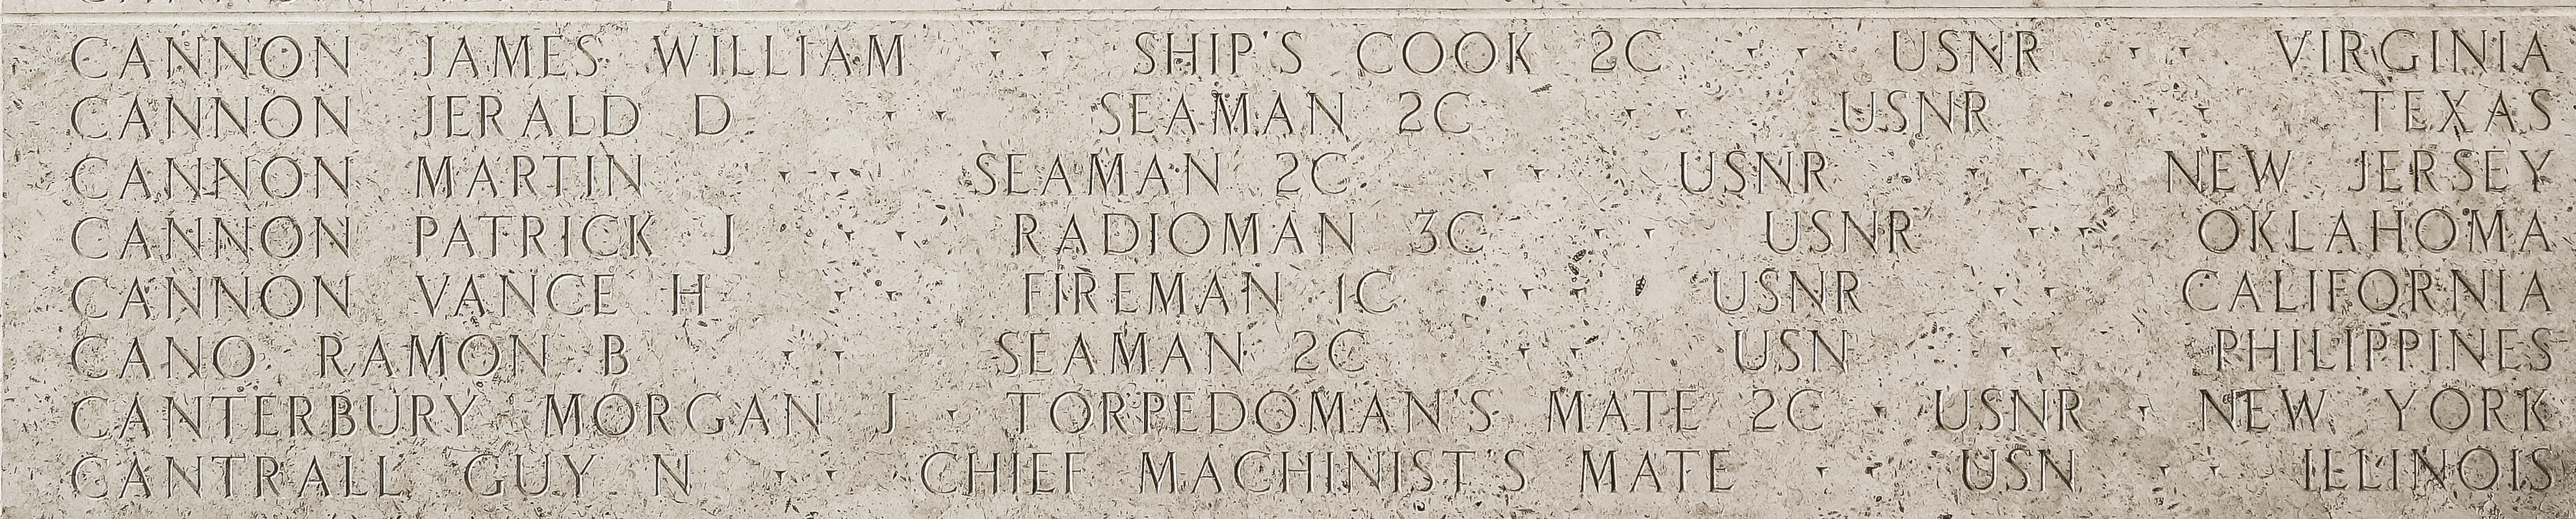 James William Cannon, Ship's Cook Second Class